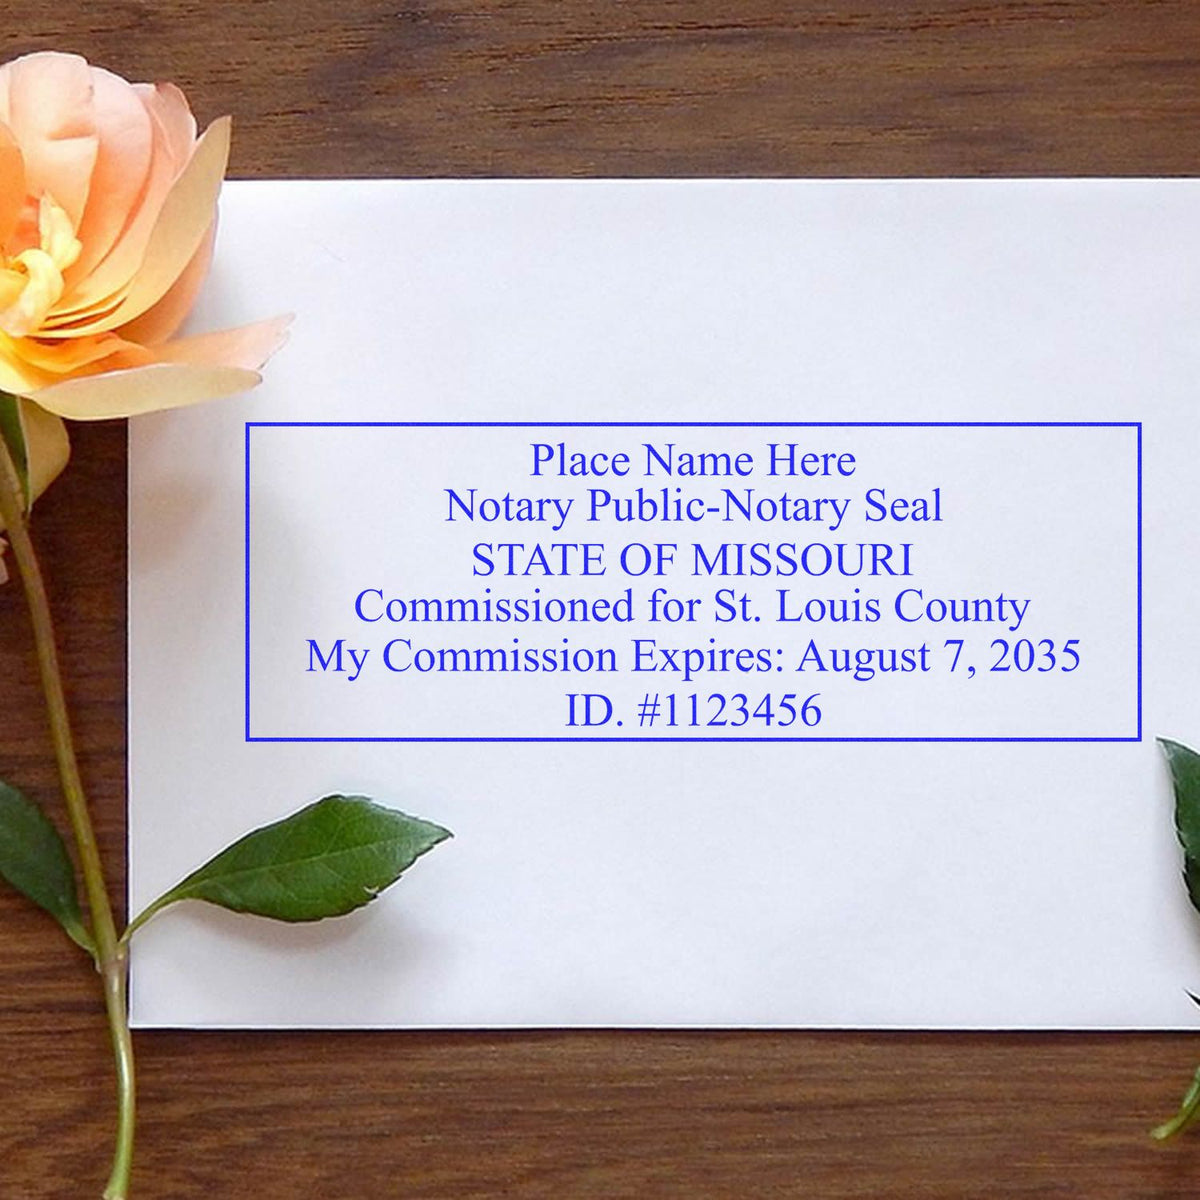 A lifestyle photo showing a stamped image of the Wooden Handle Missouri Rectangular Notary Public Stamp on a piece of paper